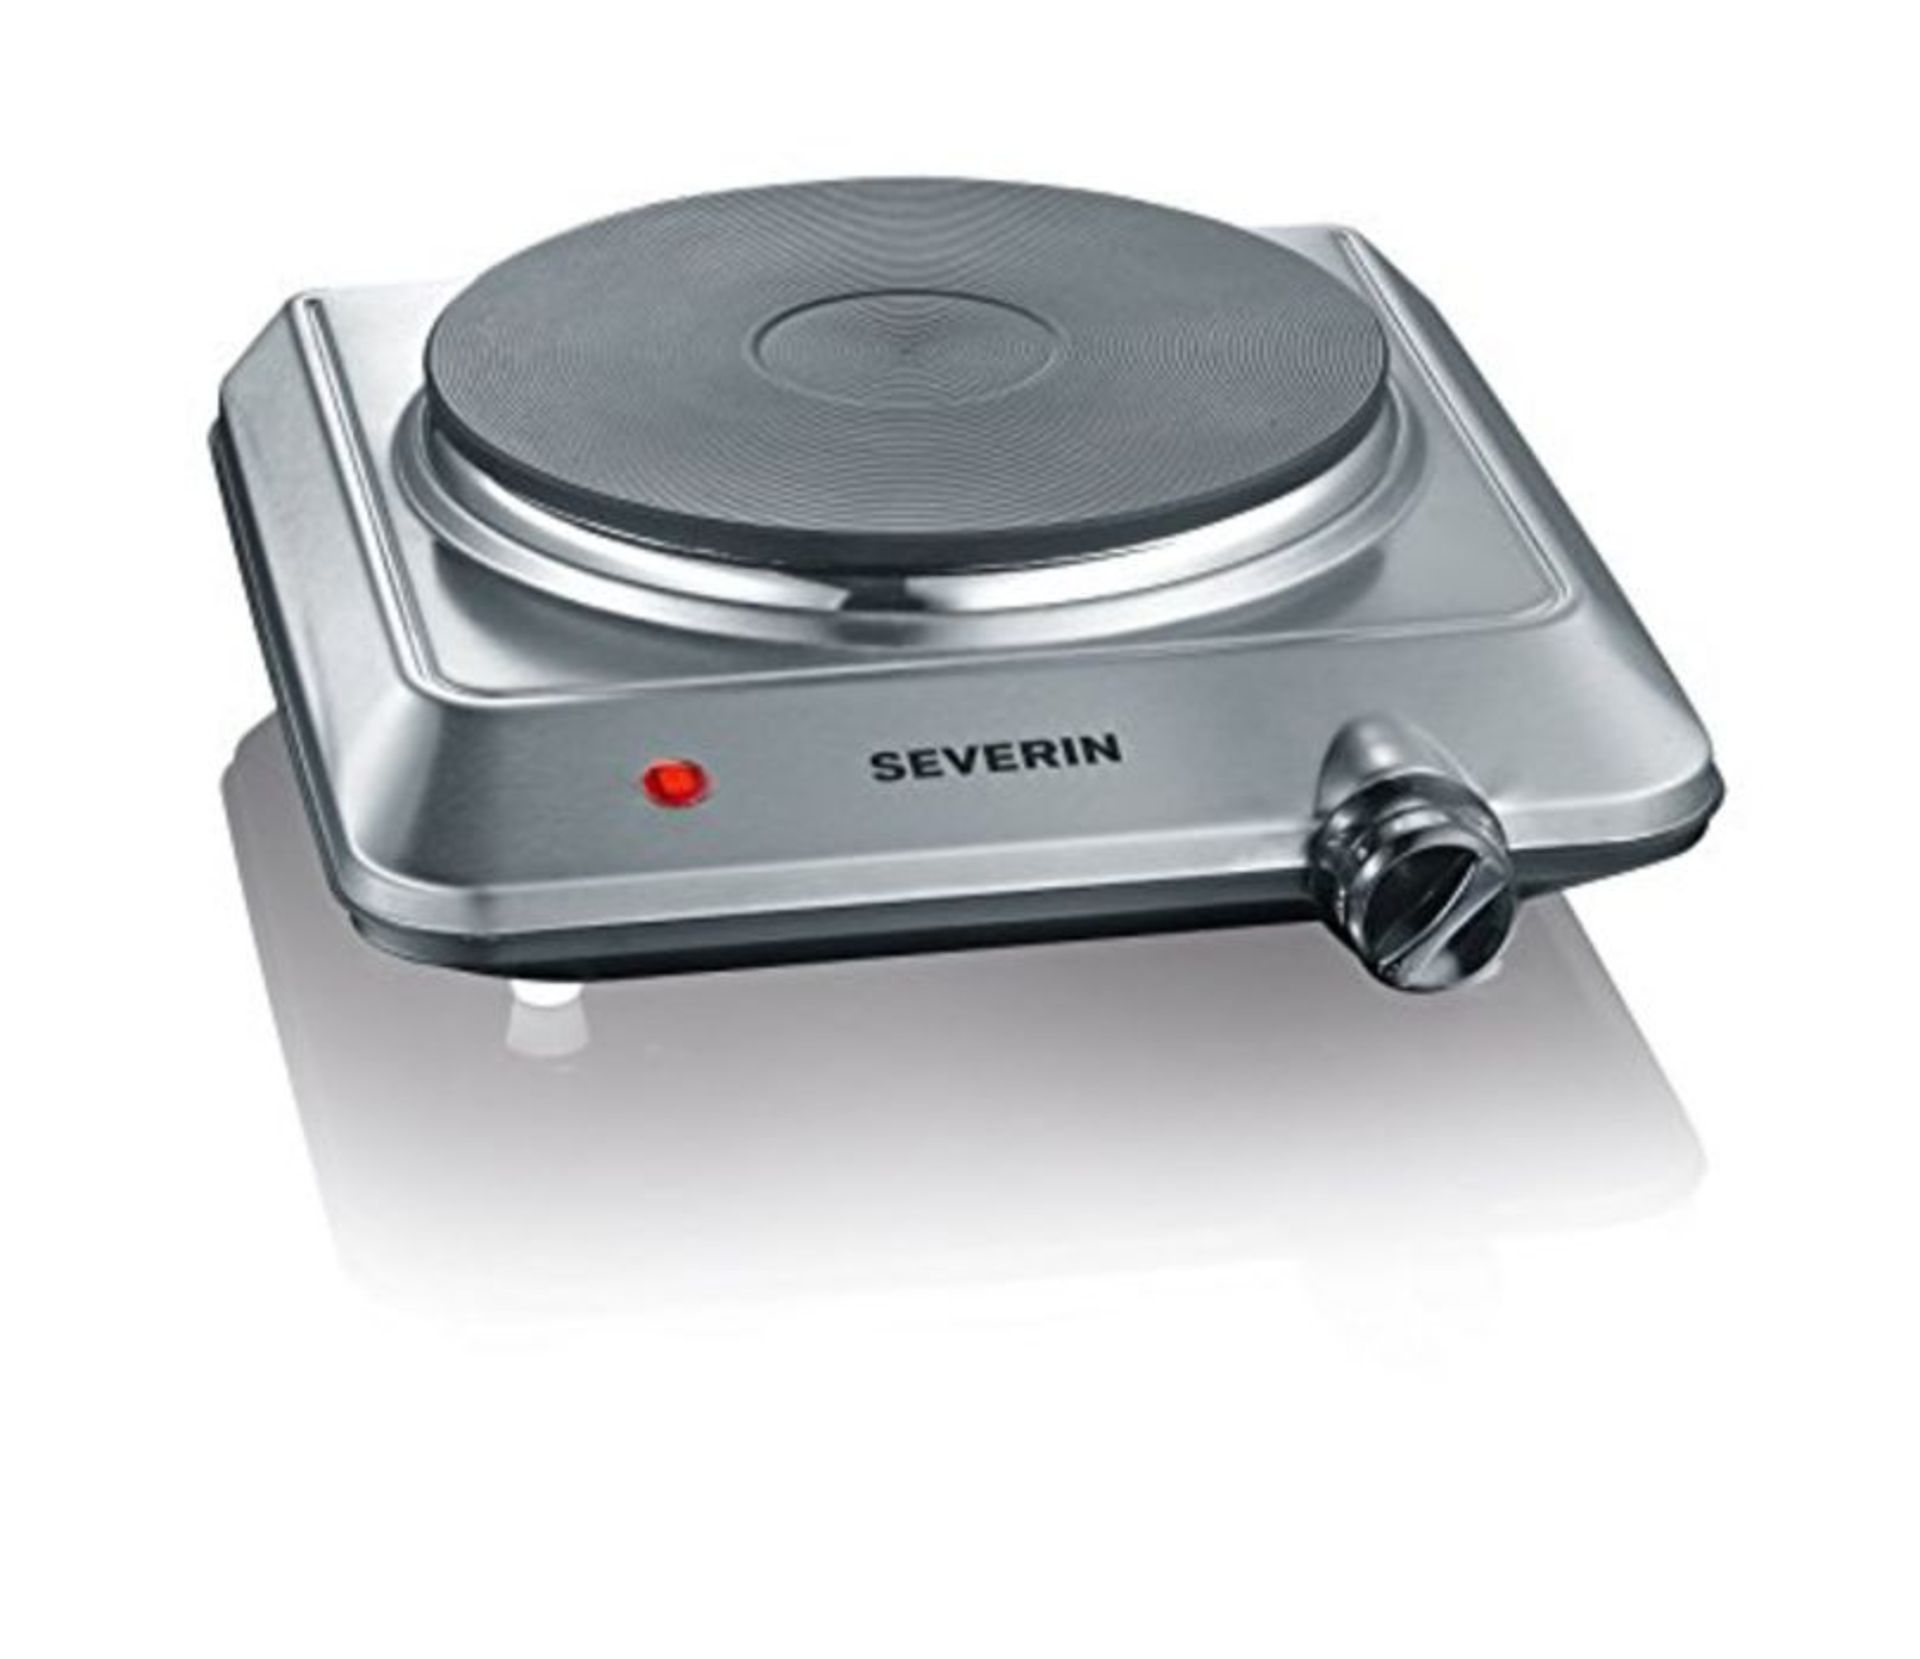 Severin Table Stove with 1500 W of Power KP 1092, Stainless Steel